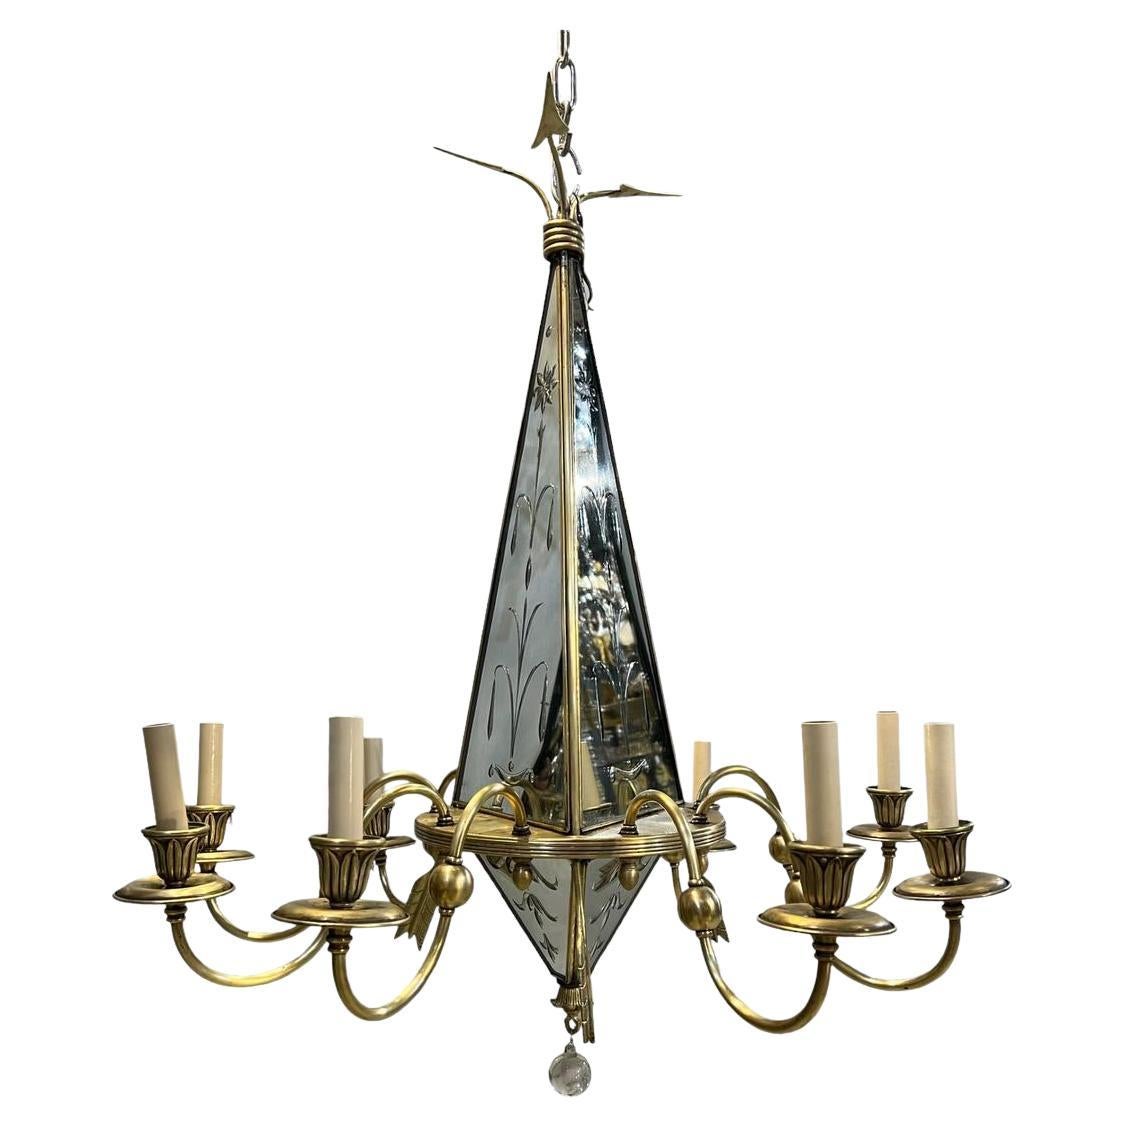 1930’s French Etched Mirrored and Bronze Chandelier For Sale